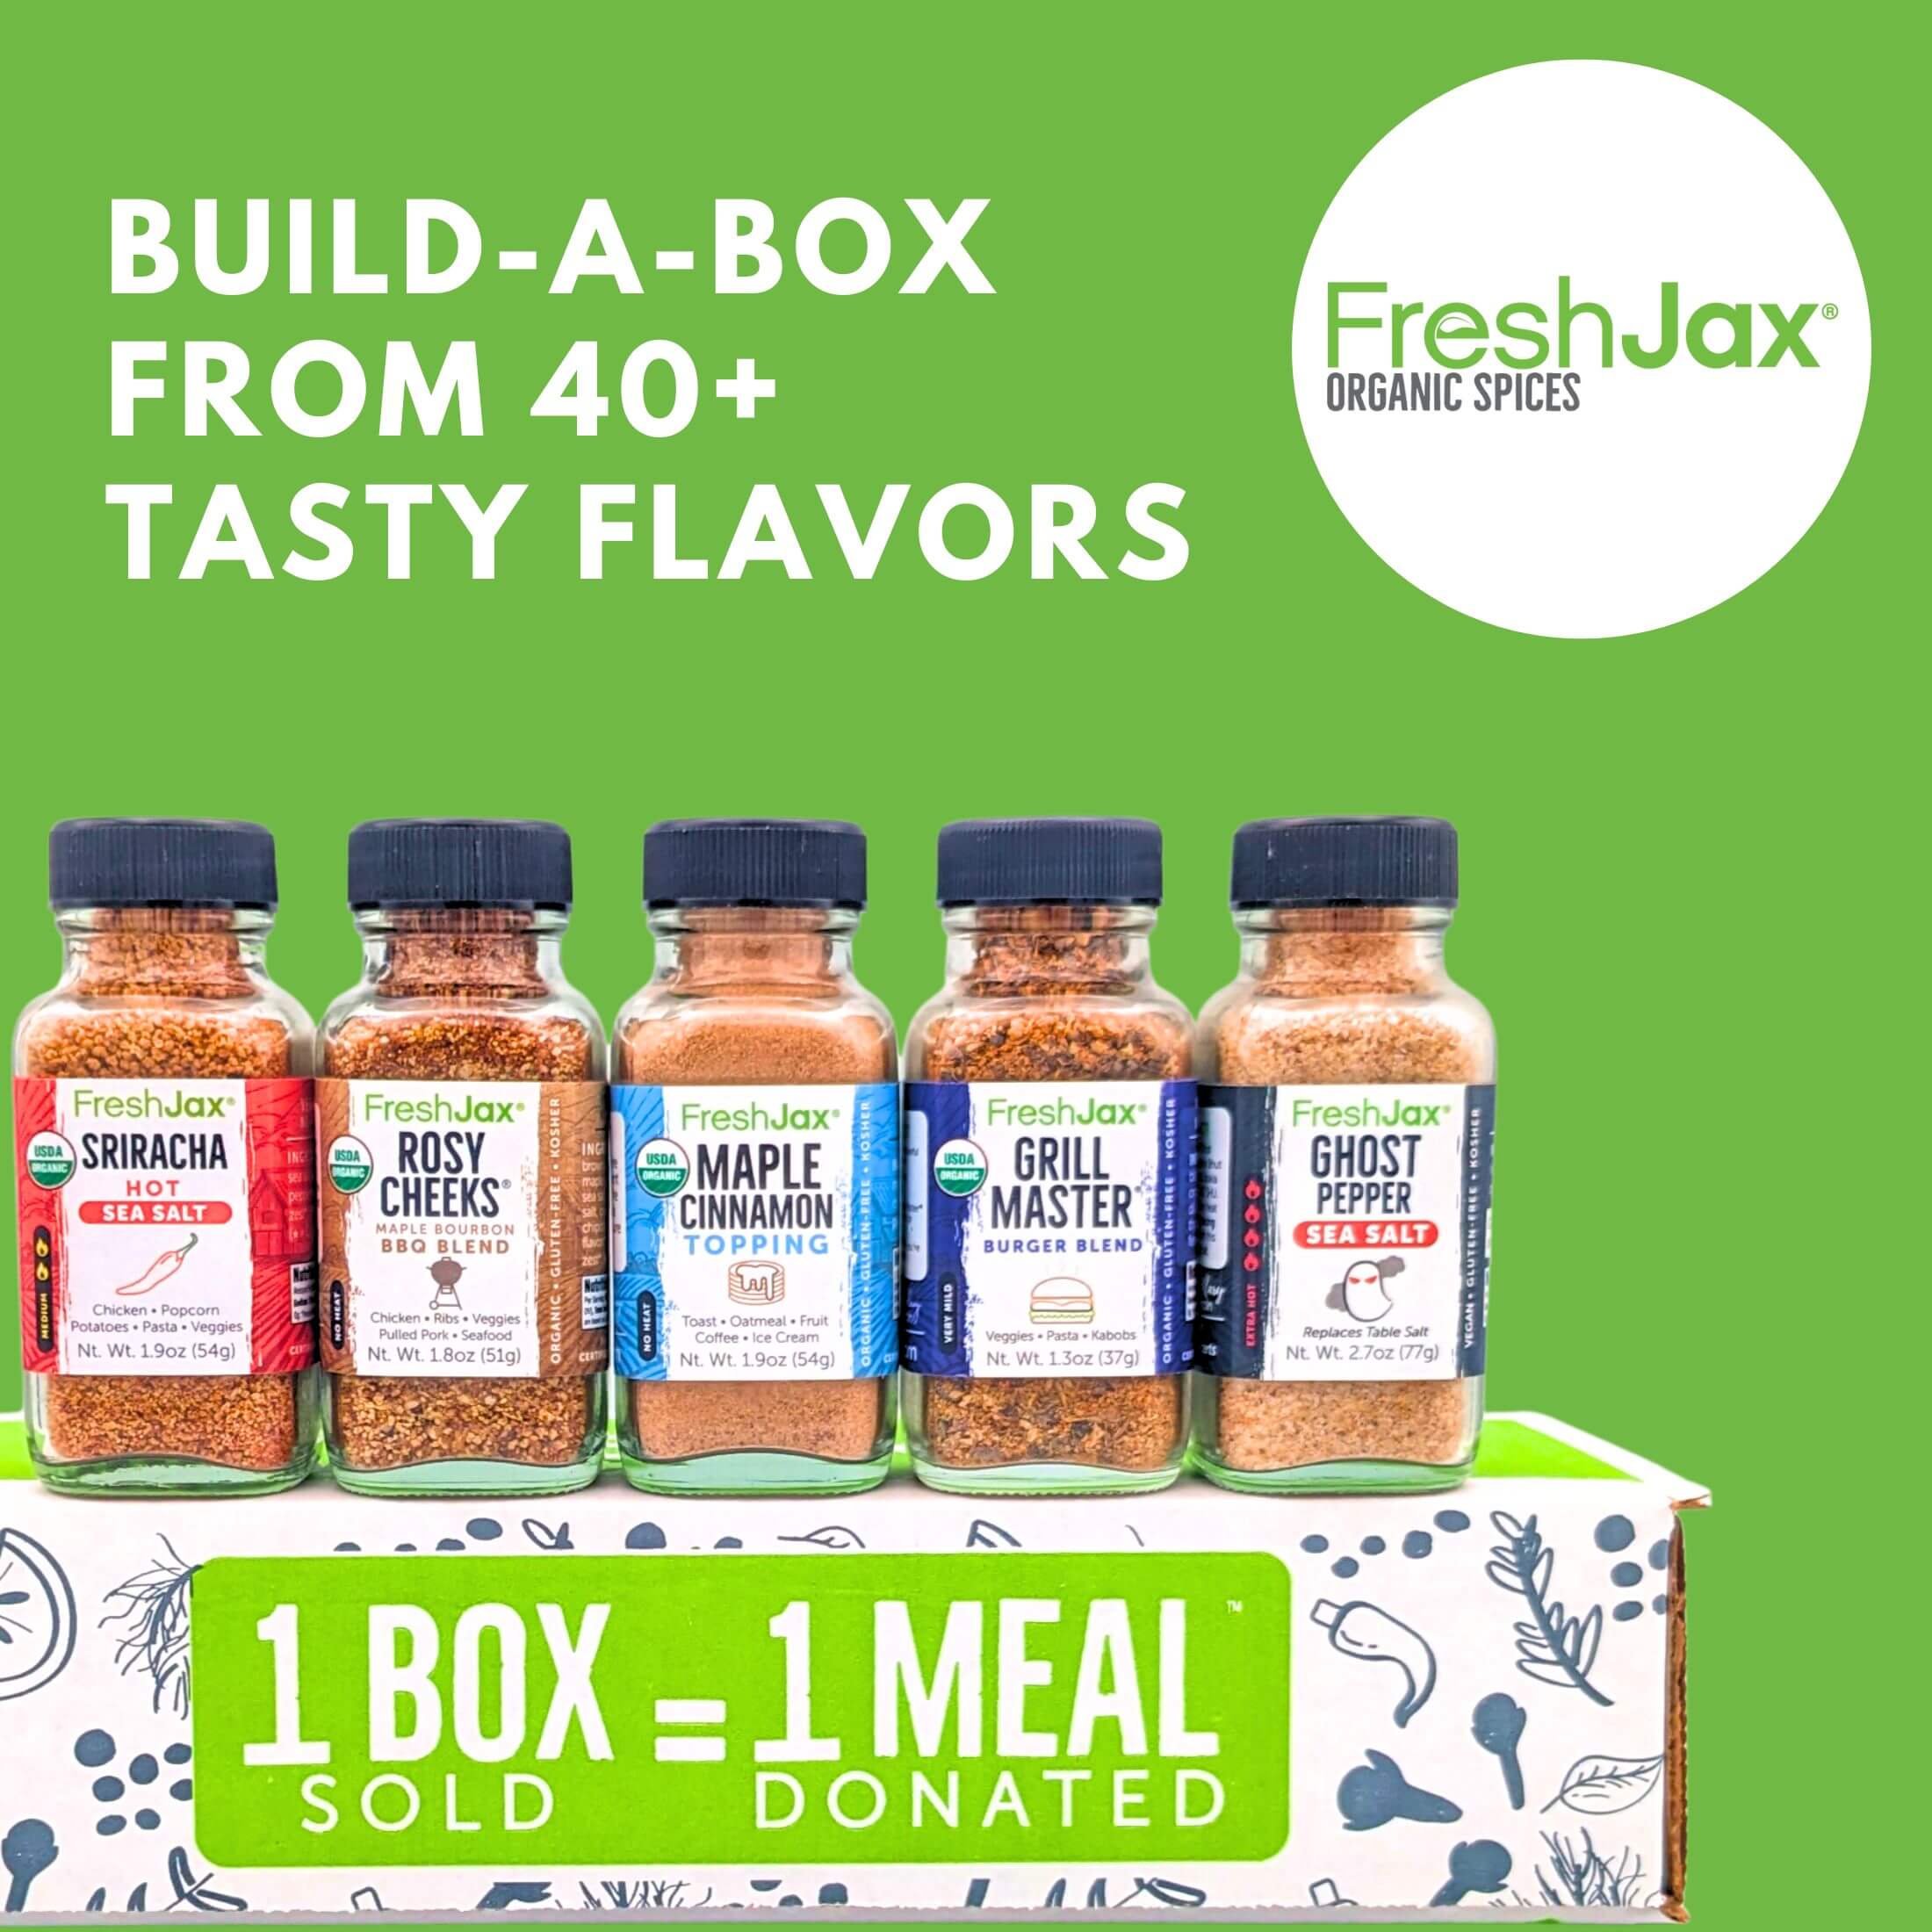 Build-a-Box from 40+ Tasty Flavors